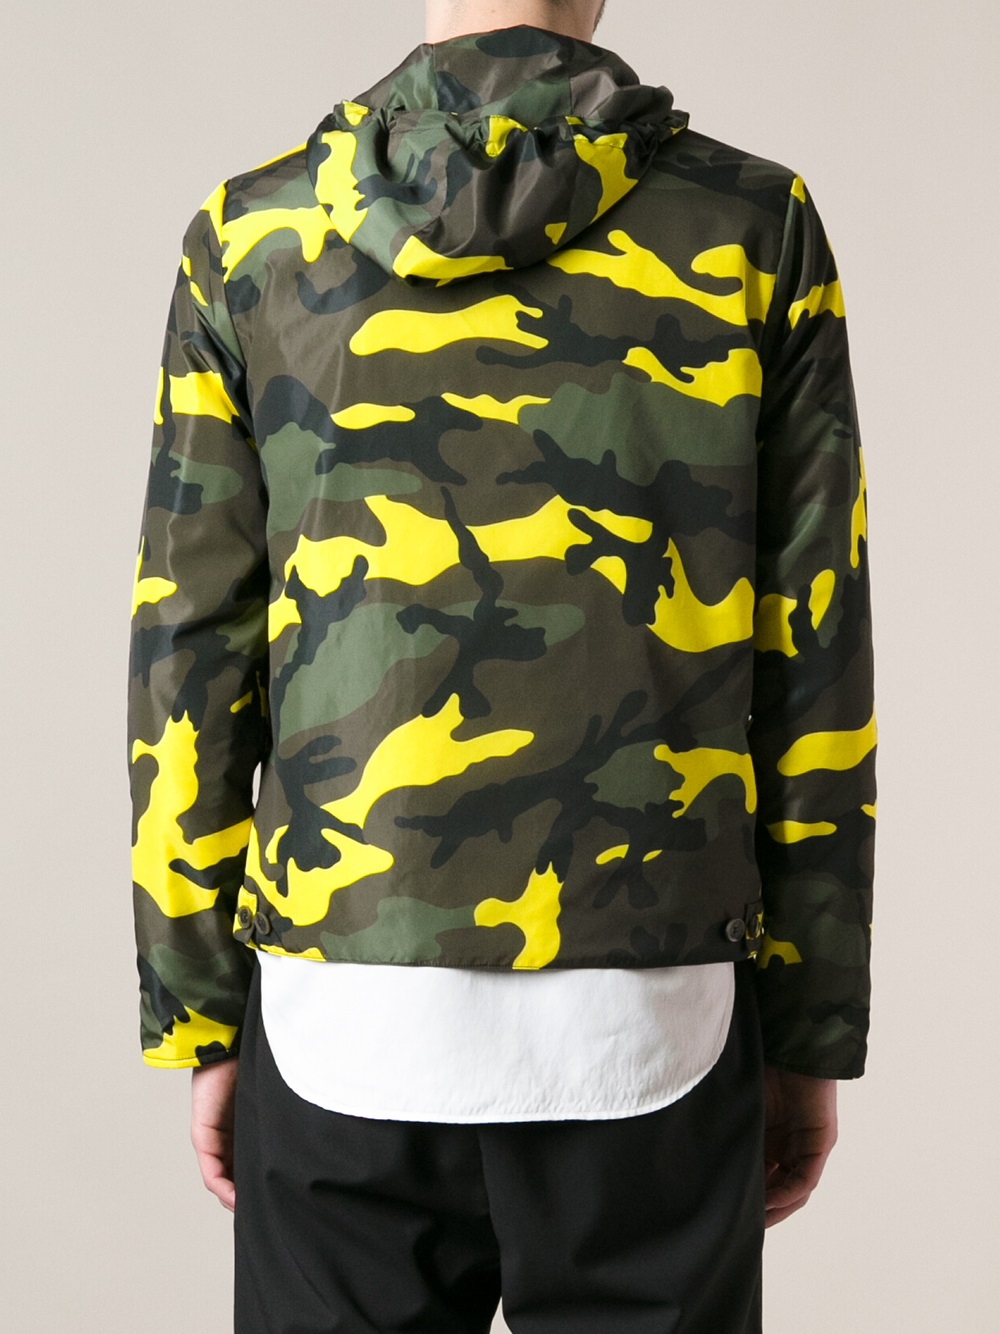 Lyst - Valentino Camouflage Jacket in Green for Men